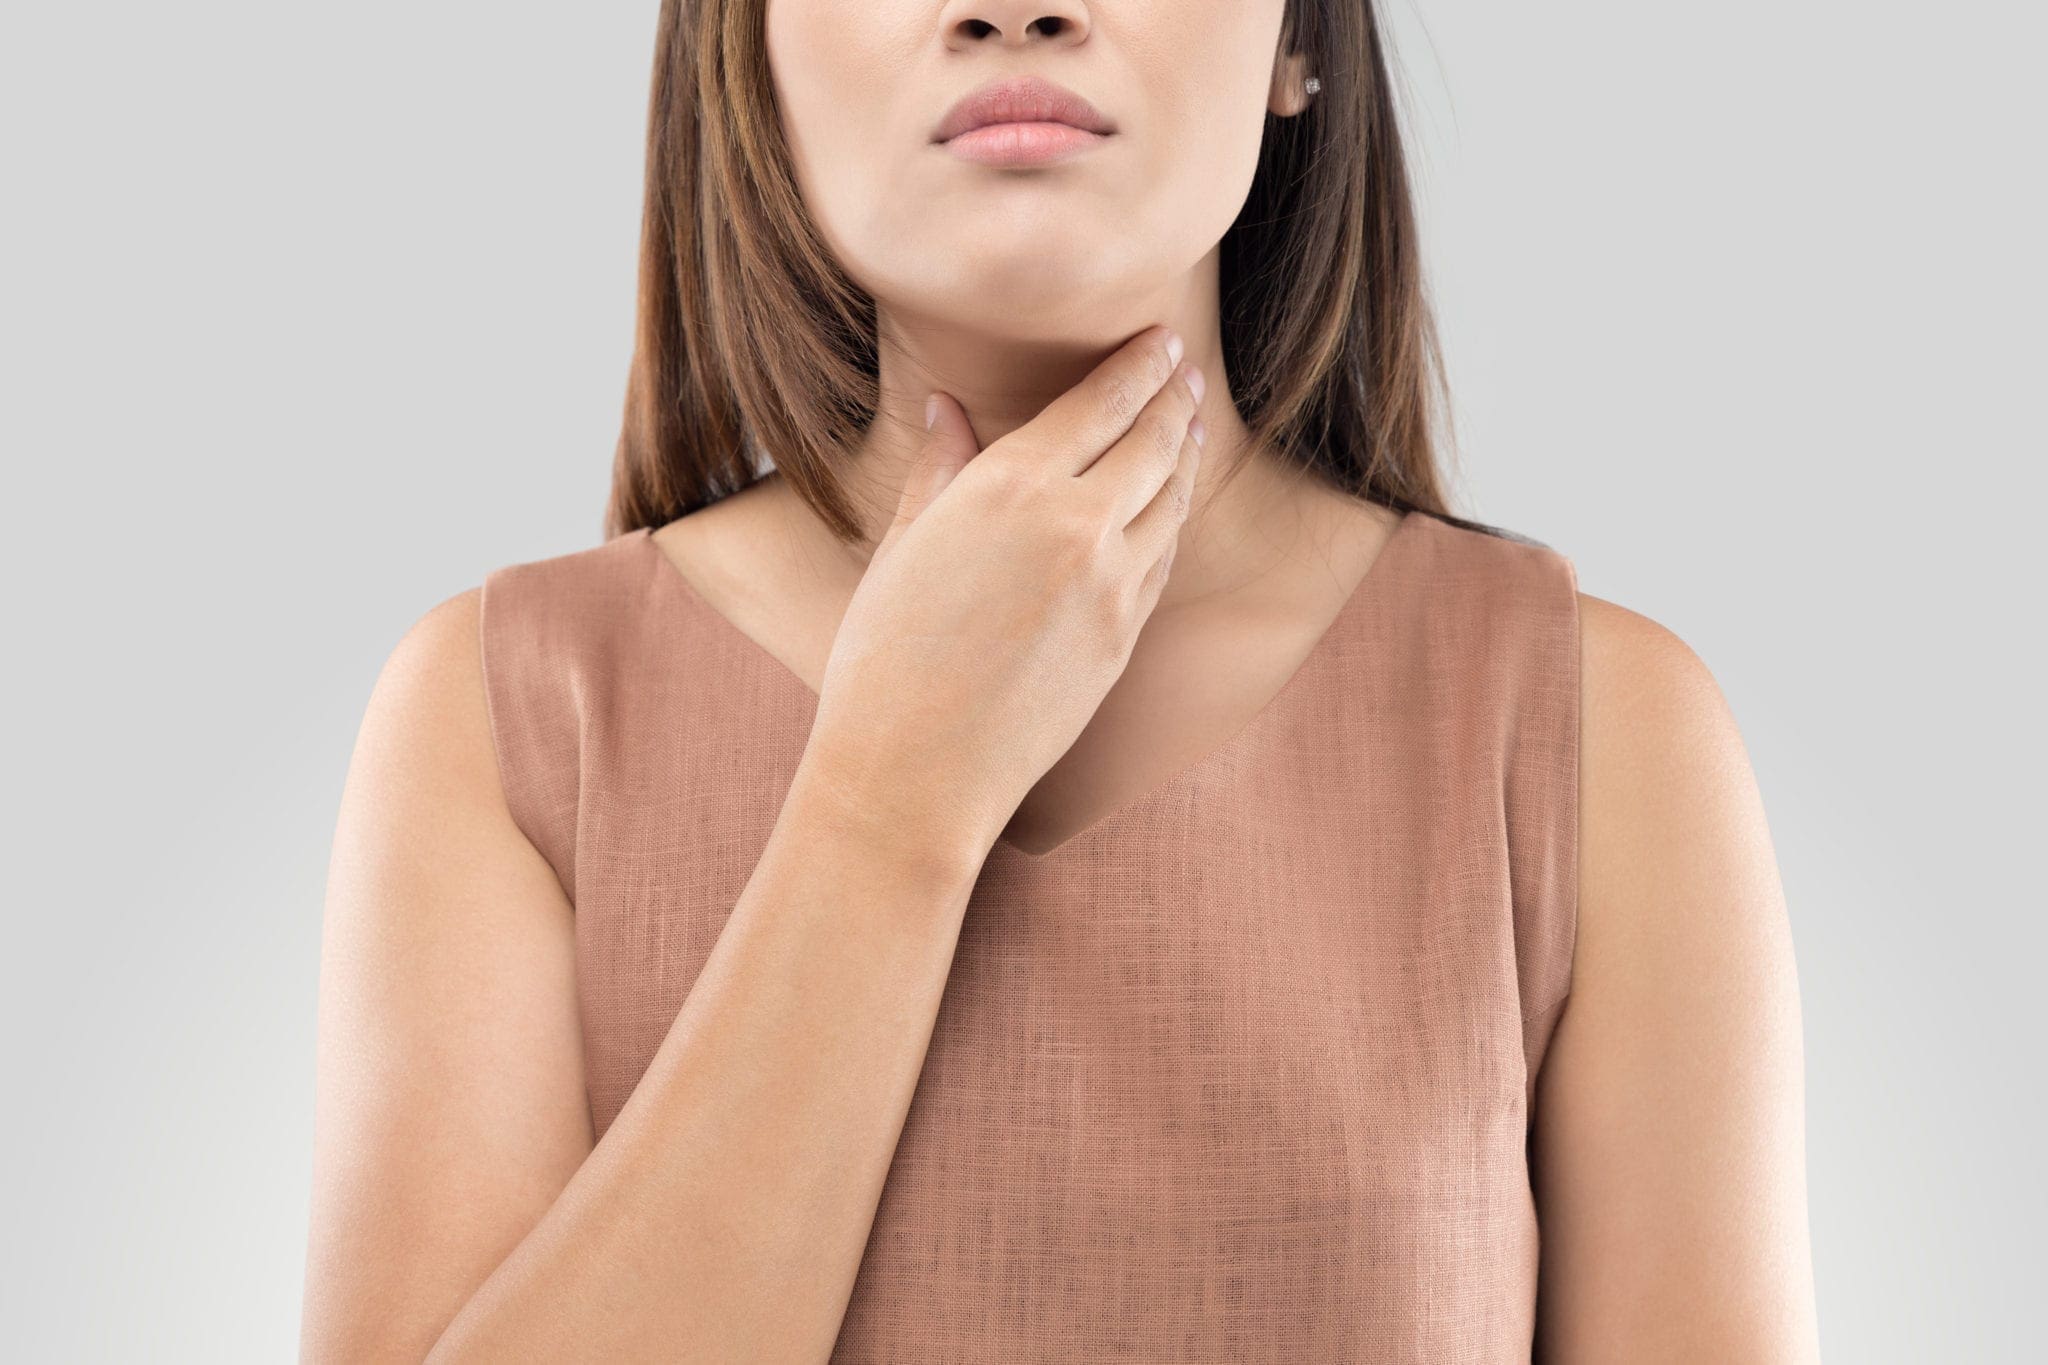 Sore Throat - How to Get Rid of A Sore Throat | familydoctor.org